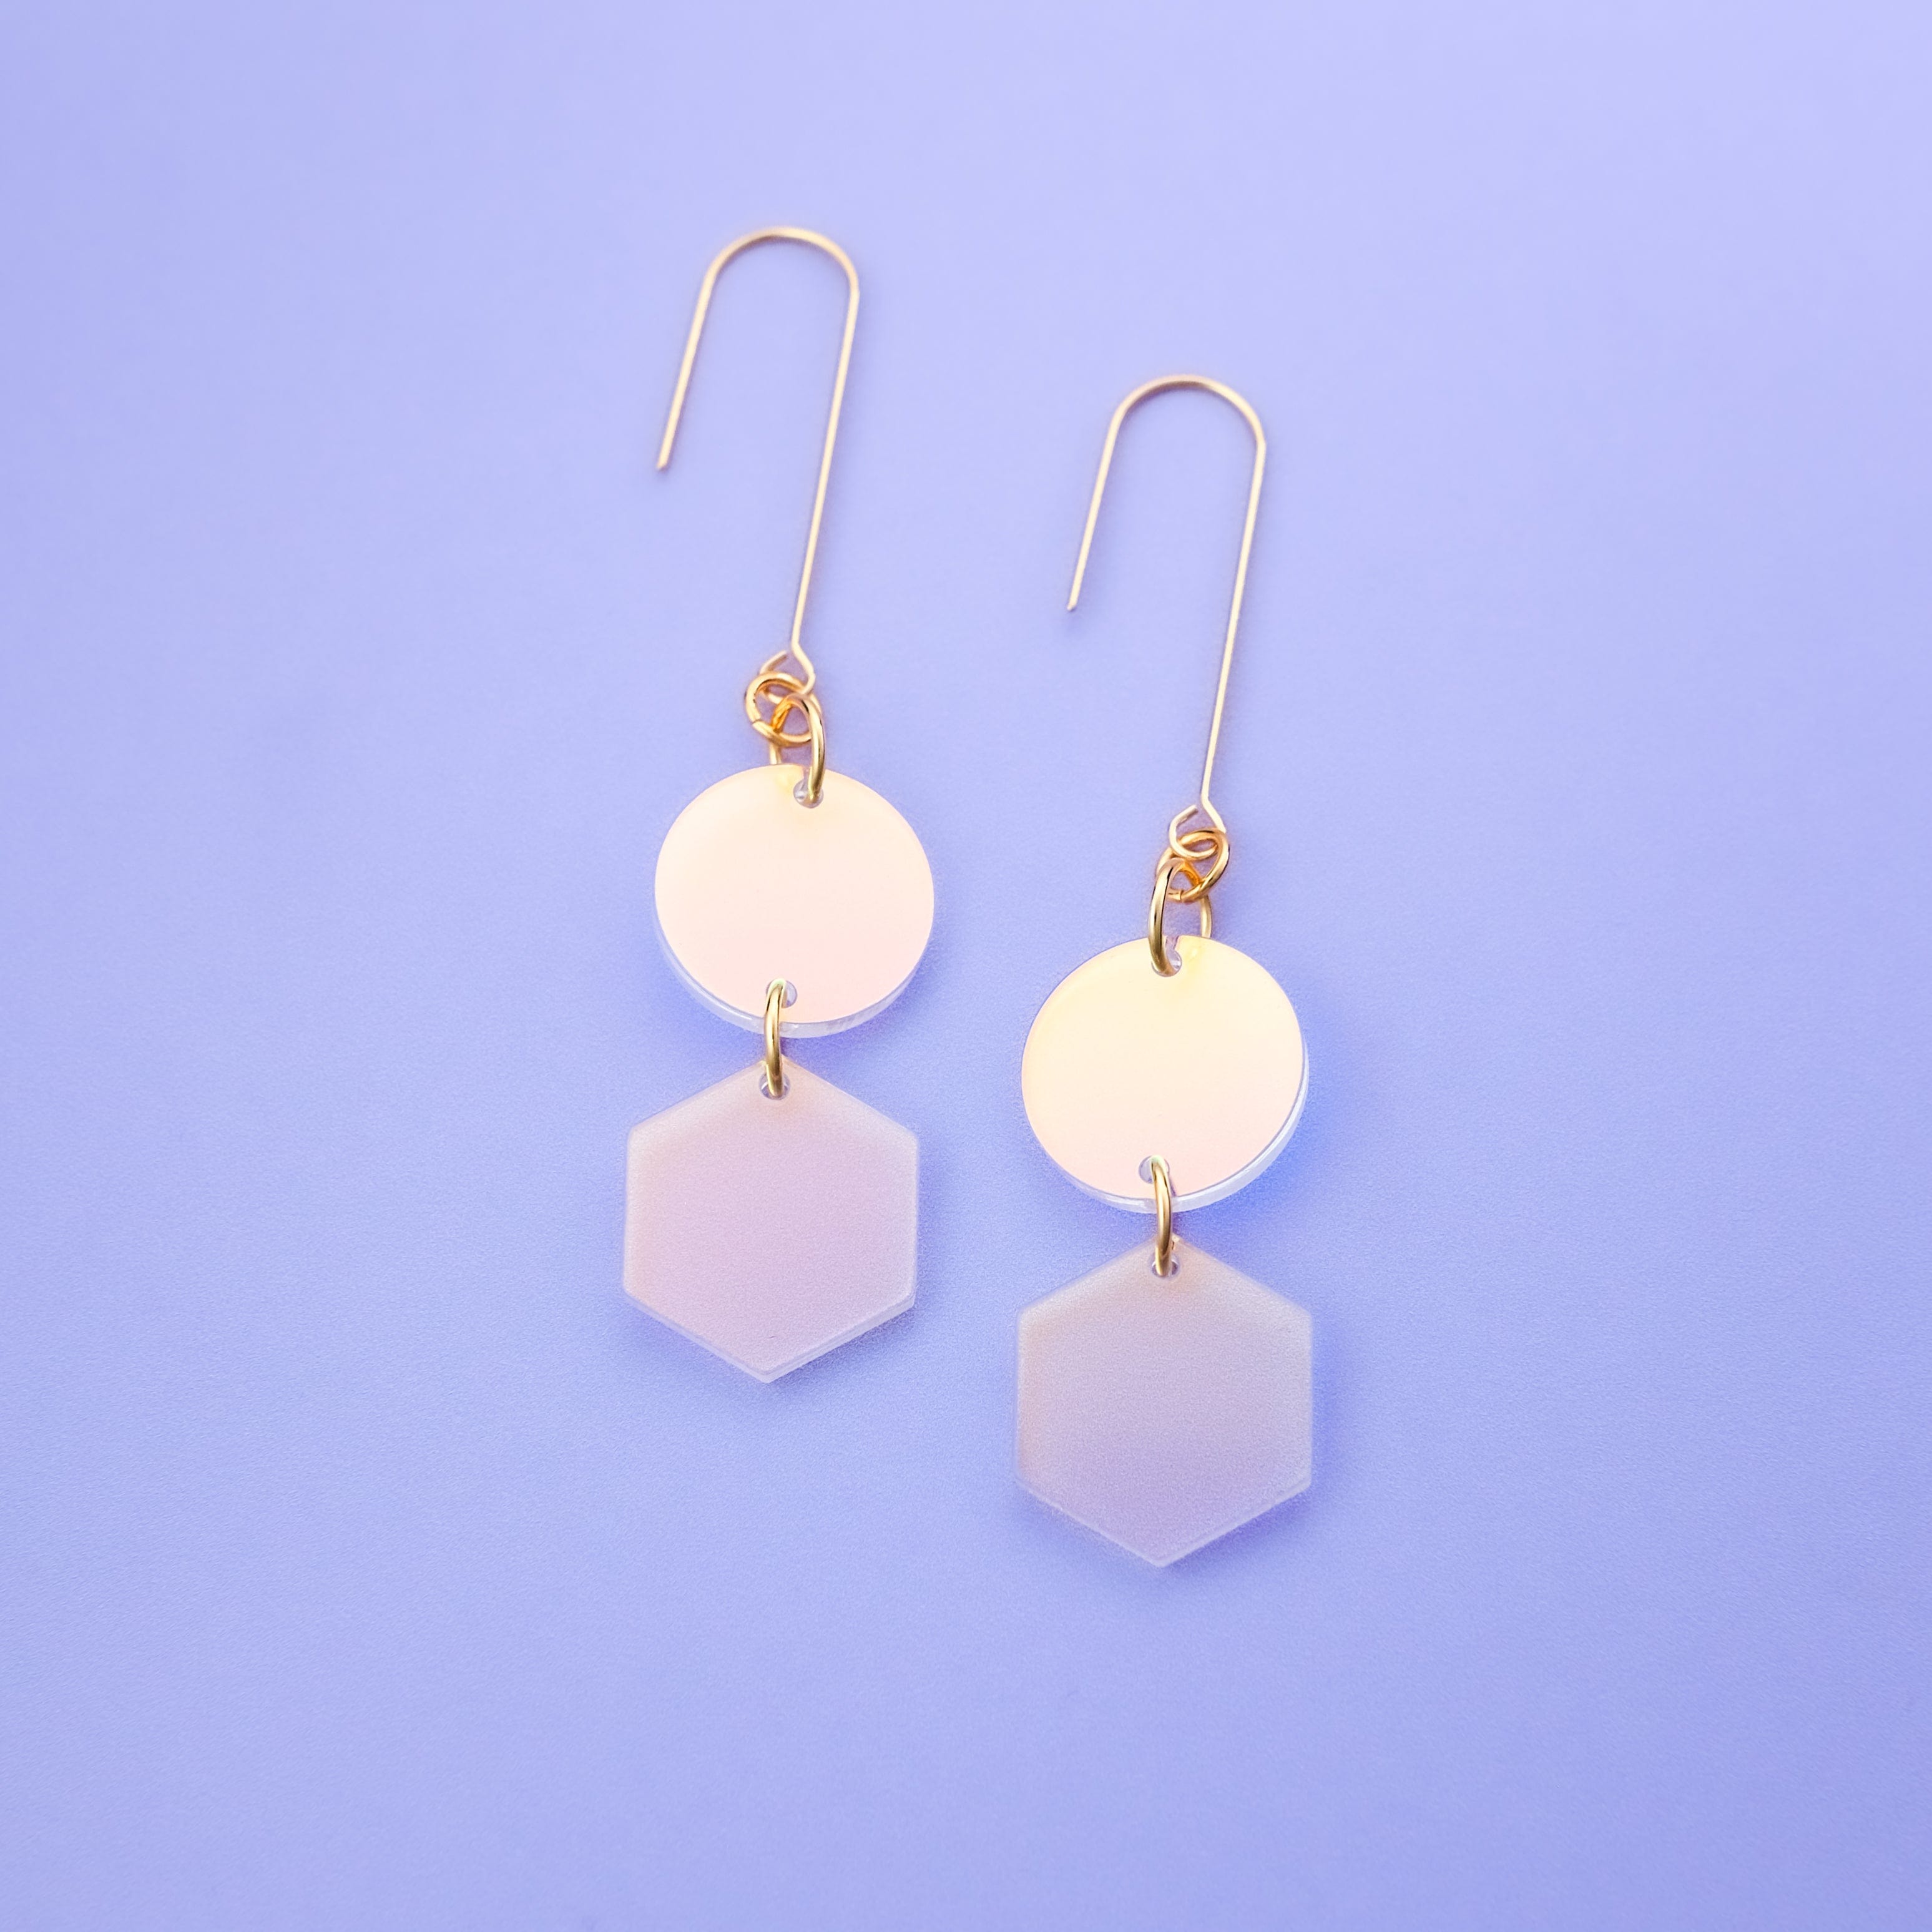 Elegant, elongated and lightweight Belle Dangles geometric dangly earrings in shiny iridescent #color_iridescent